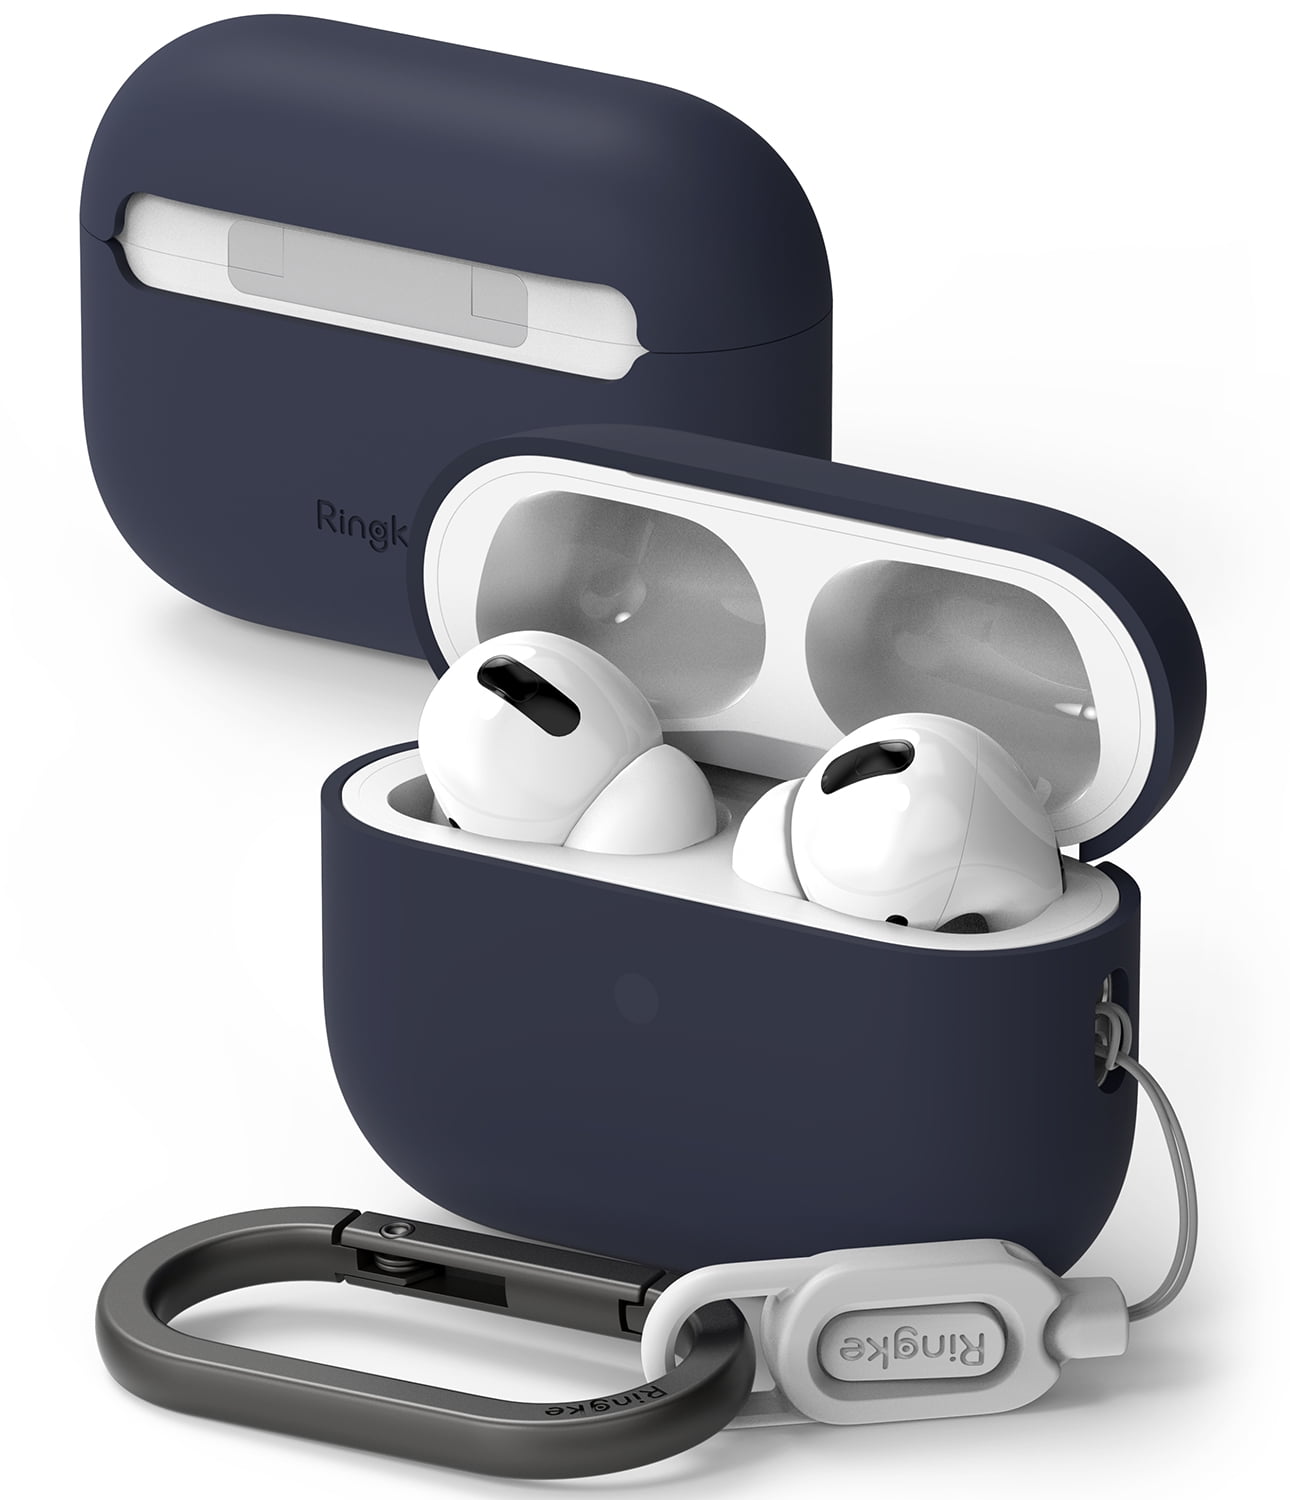 InEar Apple AirPods Pro 2 Premium Wireless Earbuds Case with Carabiner Mint